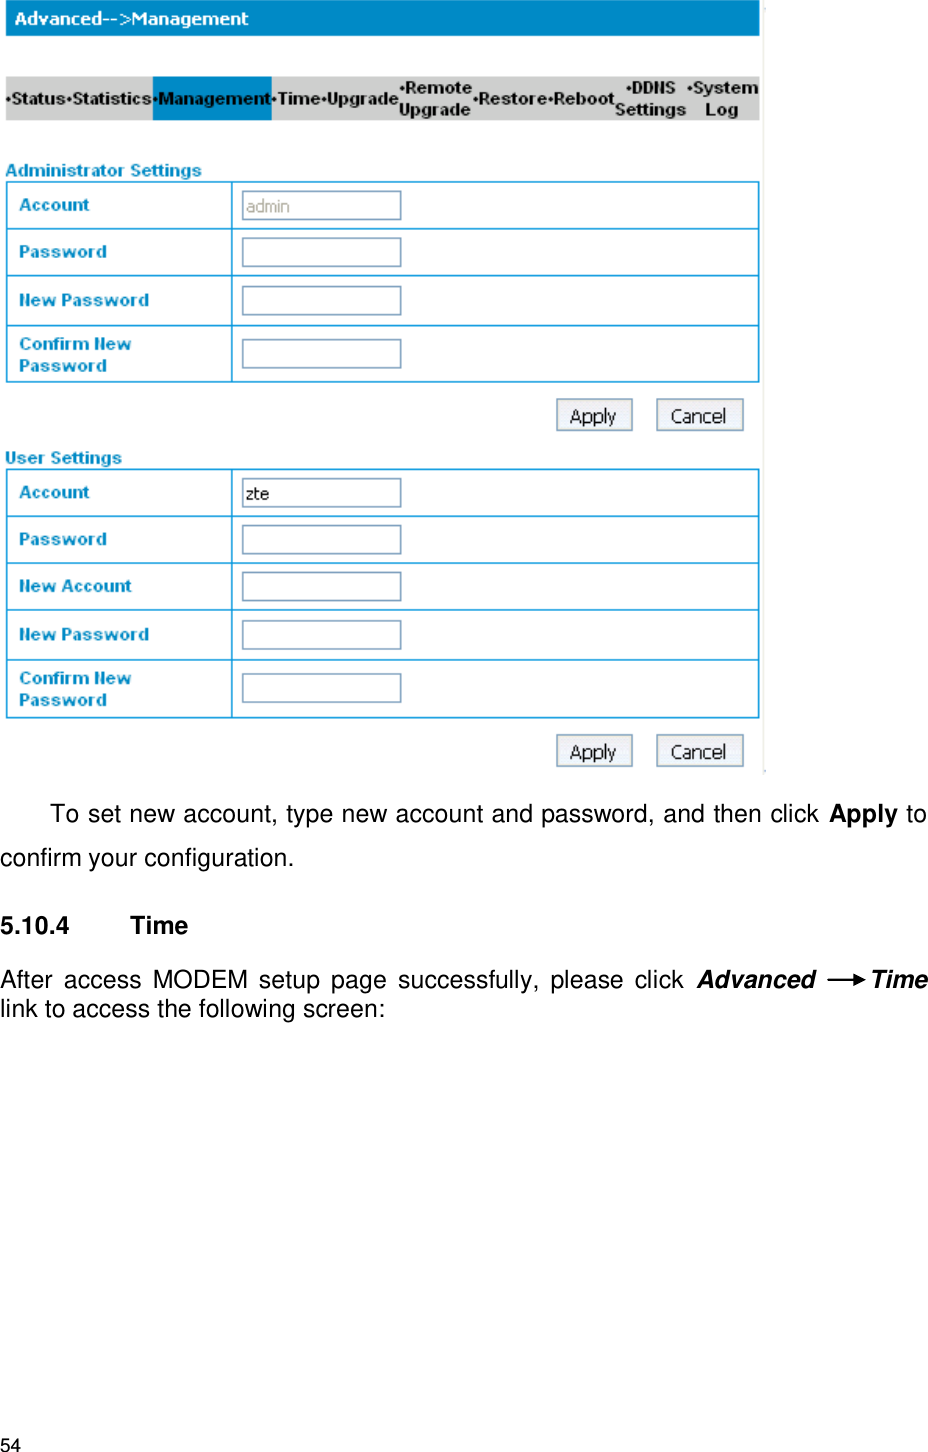 54  To set new account, type new account and password, and then click Apply to confirm your configuration. 5.10.4  Time After  access  MODEM  setup  page  successfully,  please  click  Advanced  Time link to access the following screen: 